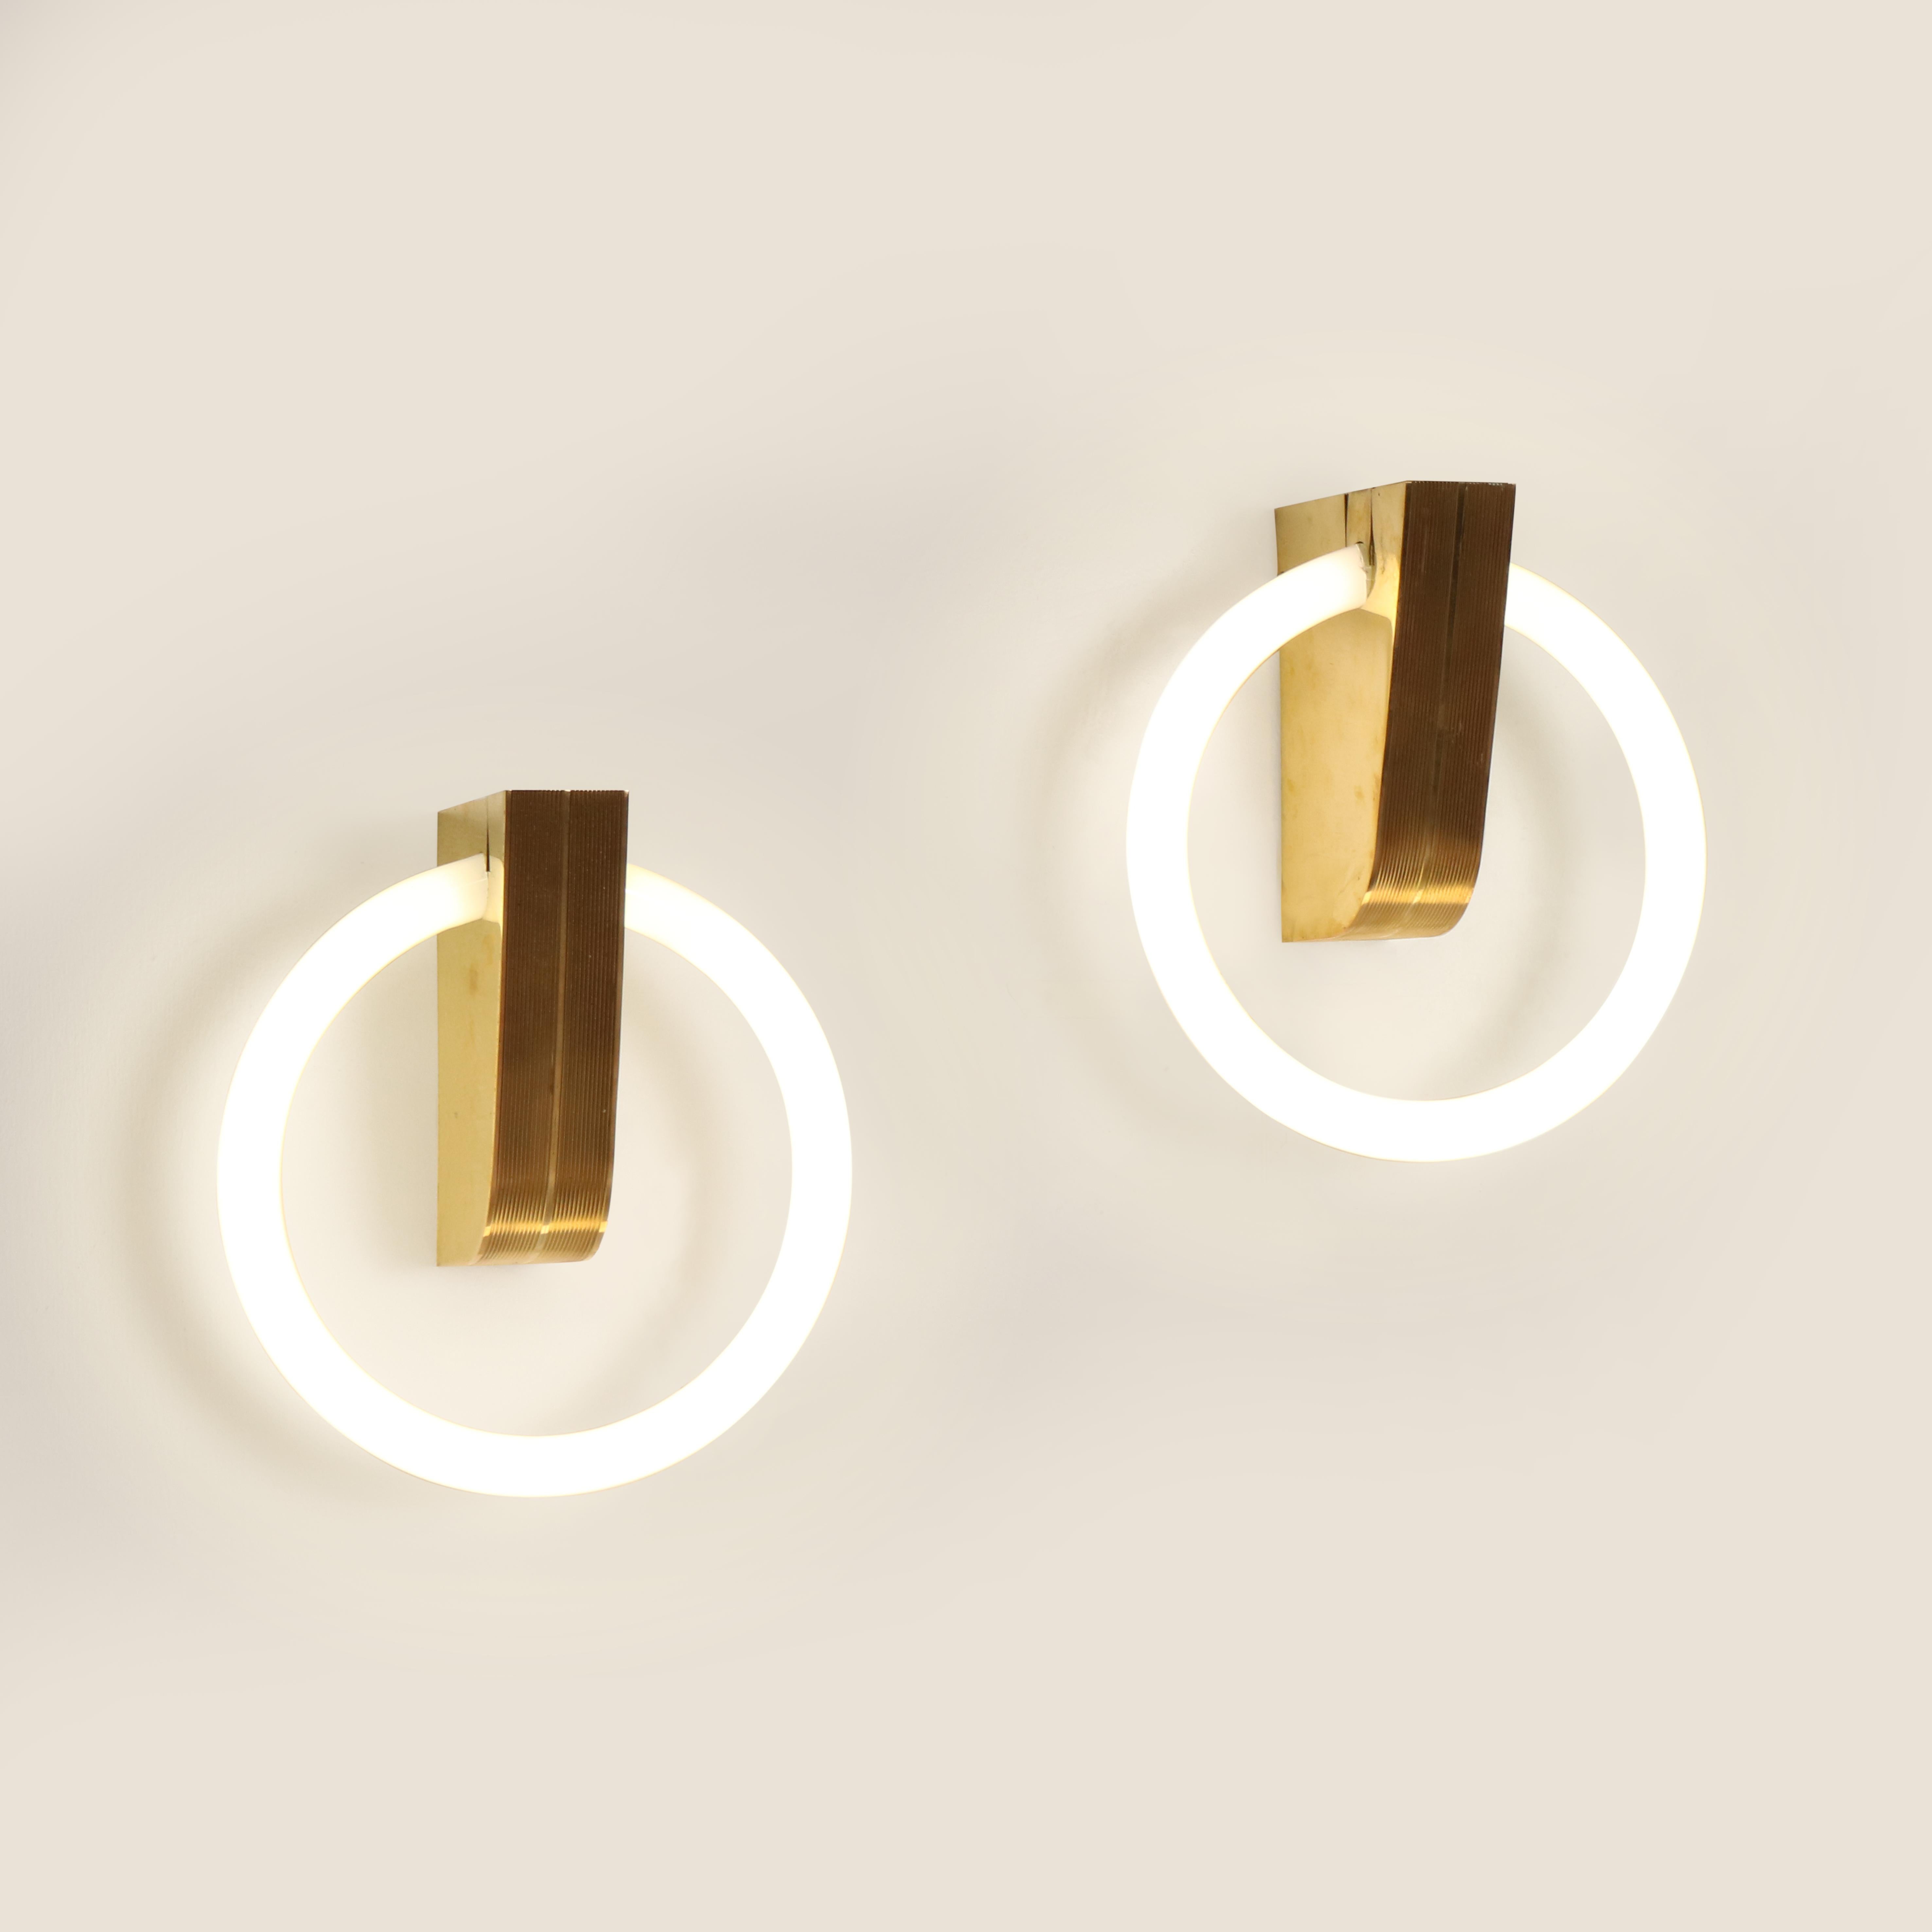 A very decorative set of two wall sconces that perfectly embodies the spirit of the 1970s with experimentation with shapes and geometries. The brass and striated brass structure encapsulates in a compact body the essence of the wall lamp by